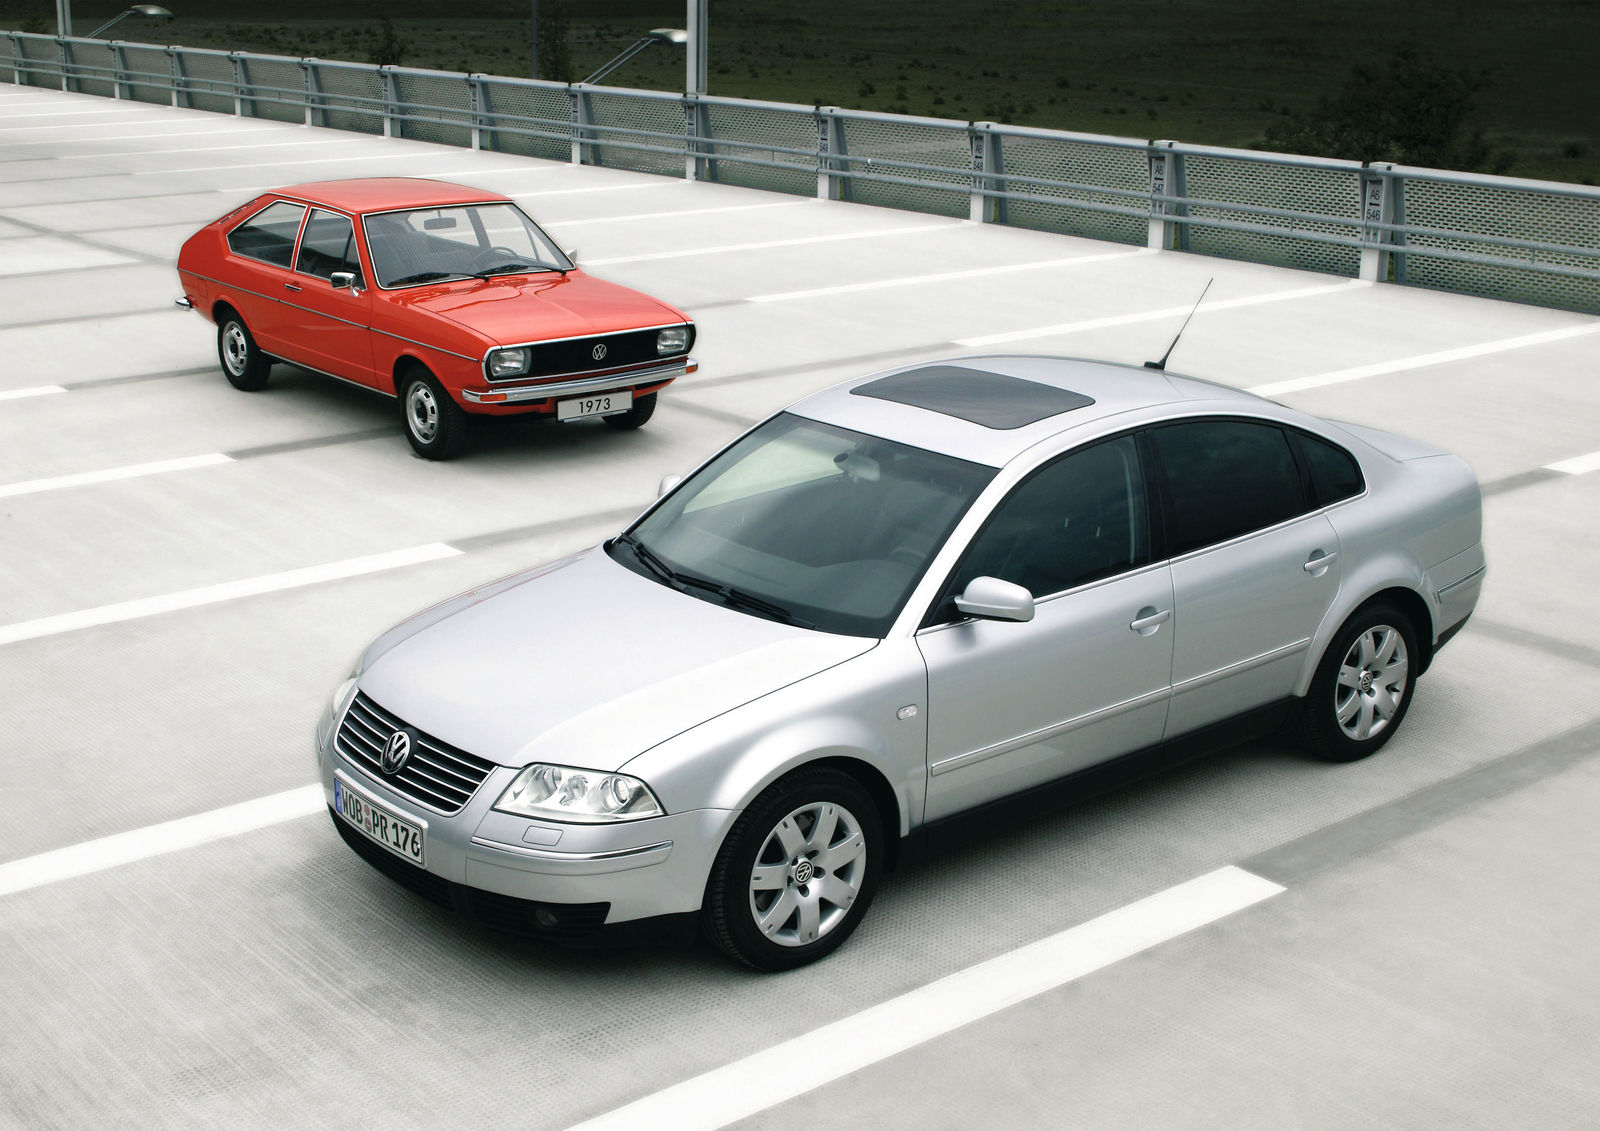 Volkswagen Passat B5 Limited Edition Was A Celebratory Car In China 